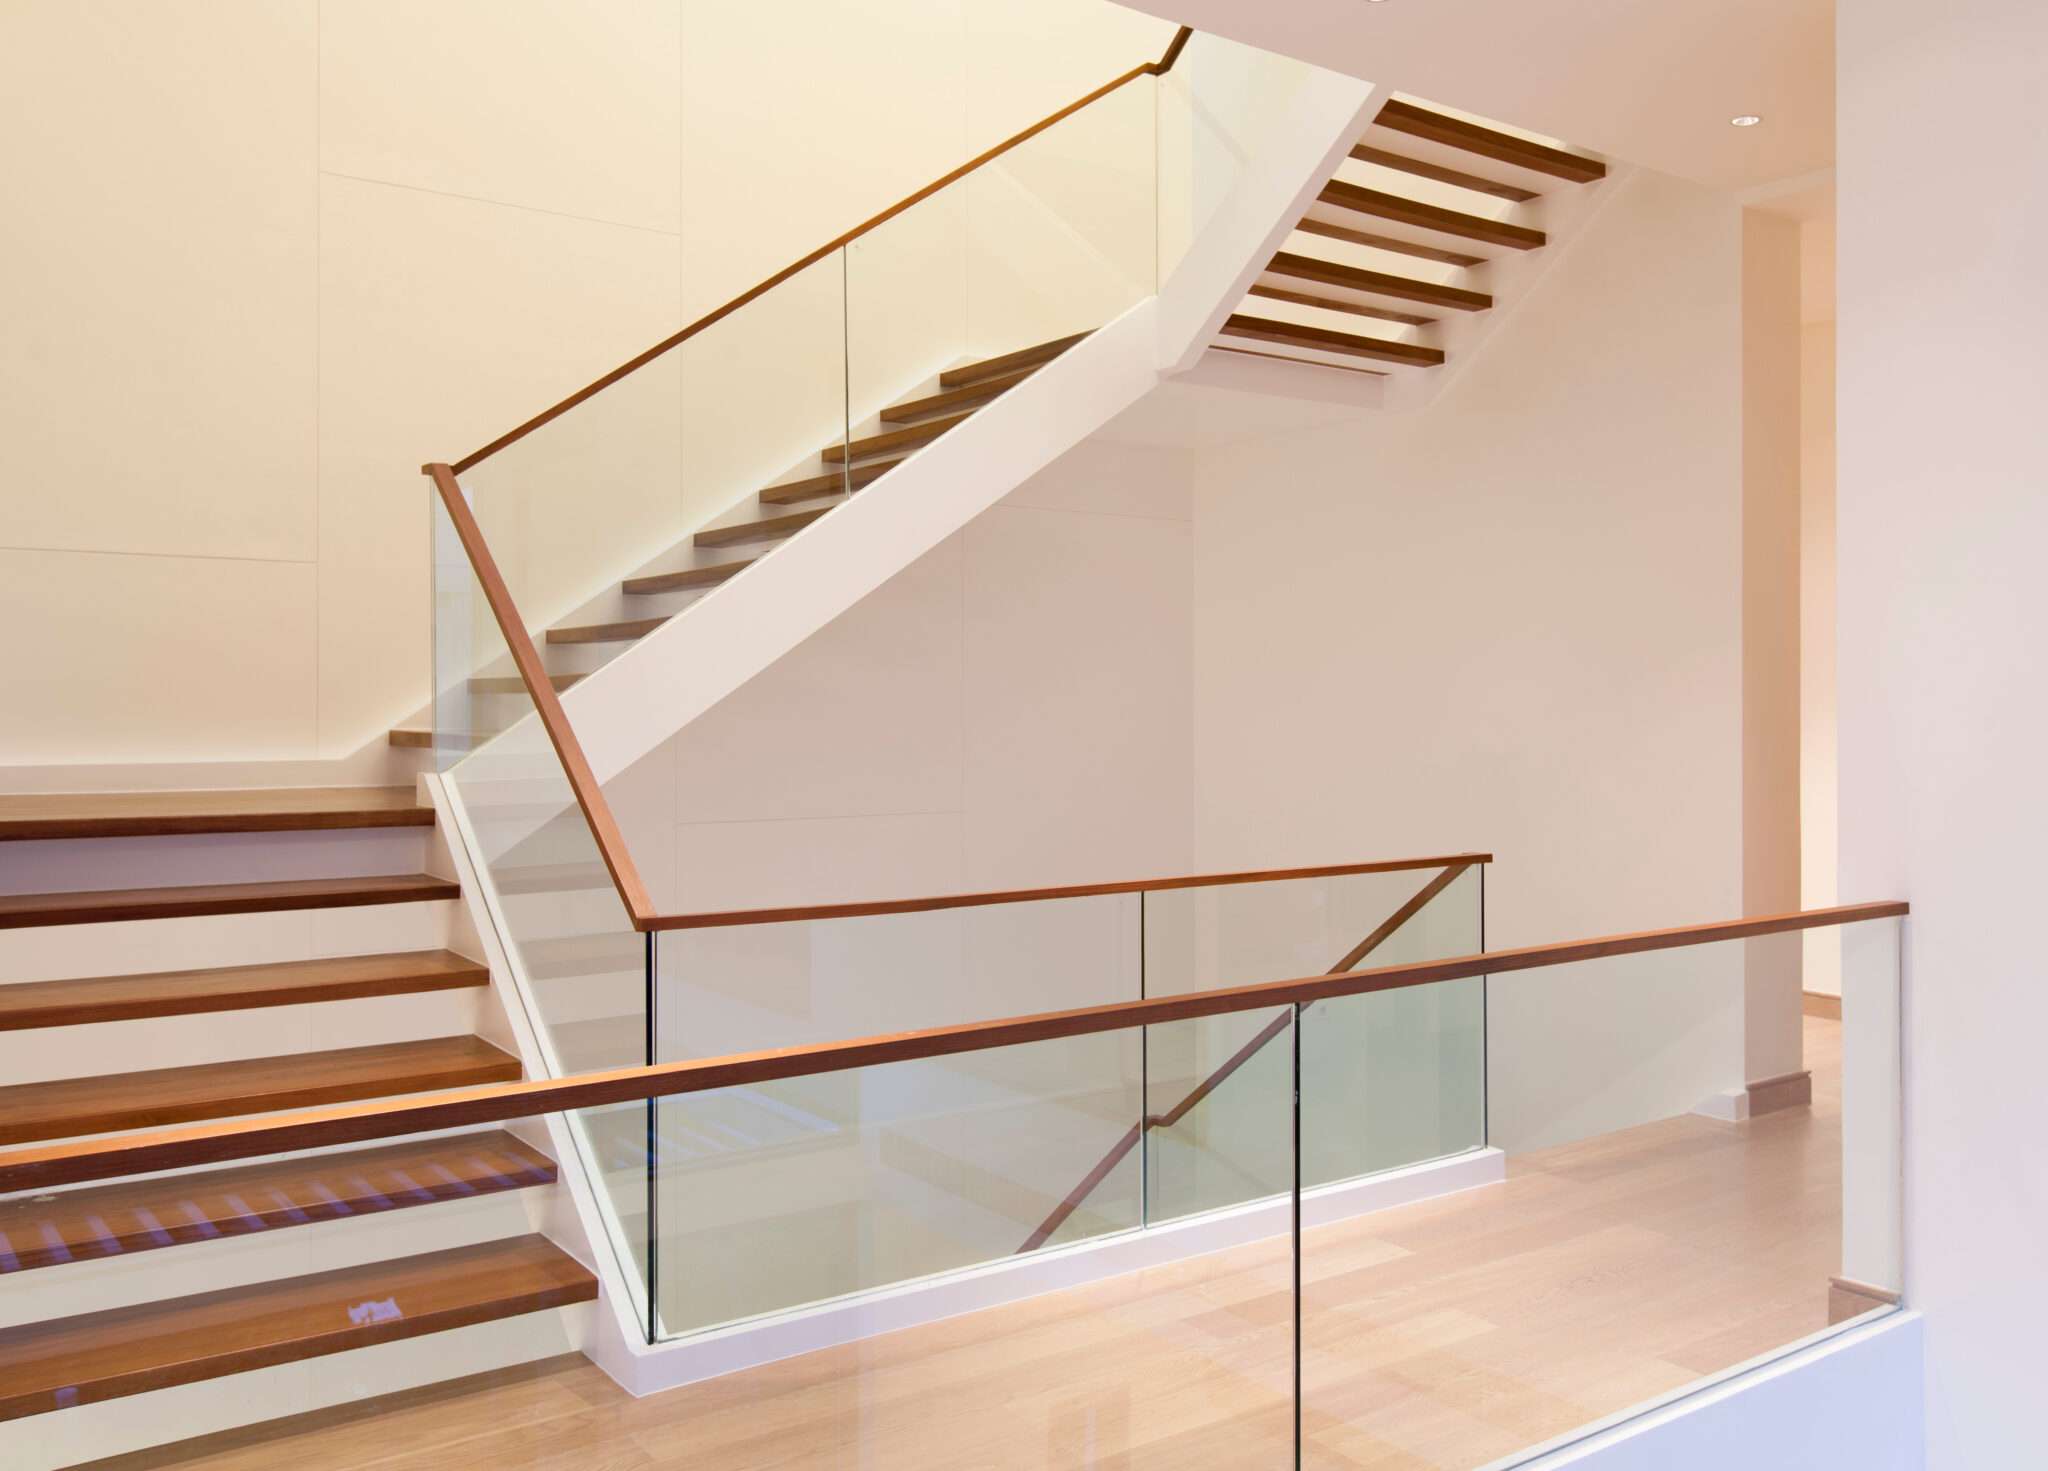 Glass railing with wood handrail on stairs